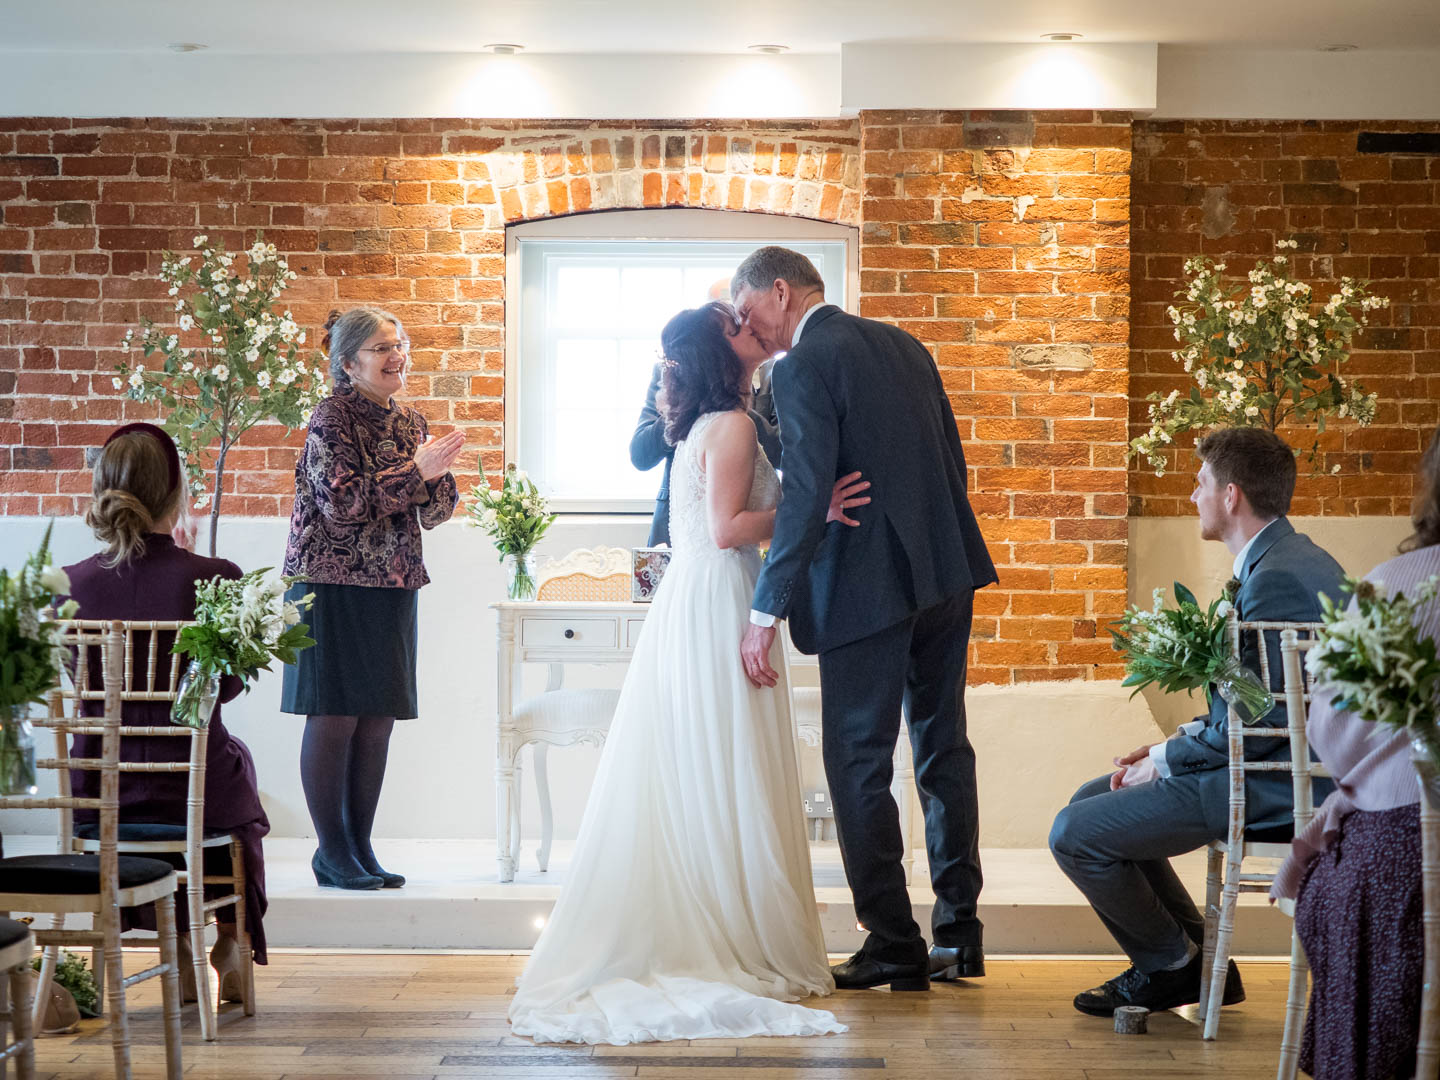 Bride and groom kiss during their wedding ceremony at Sopley Mill